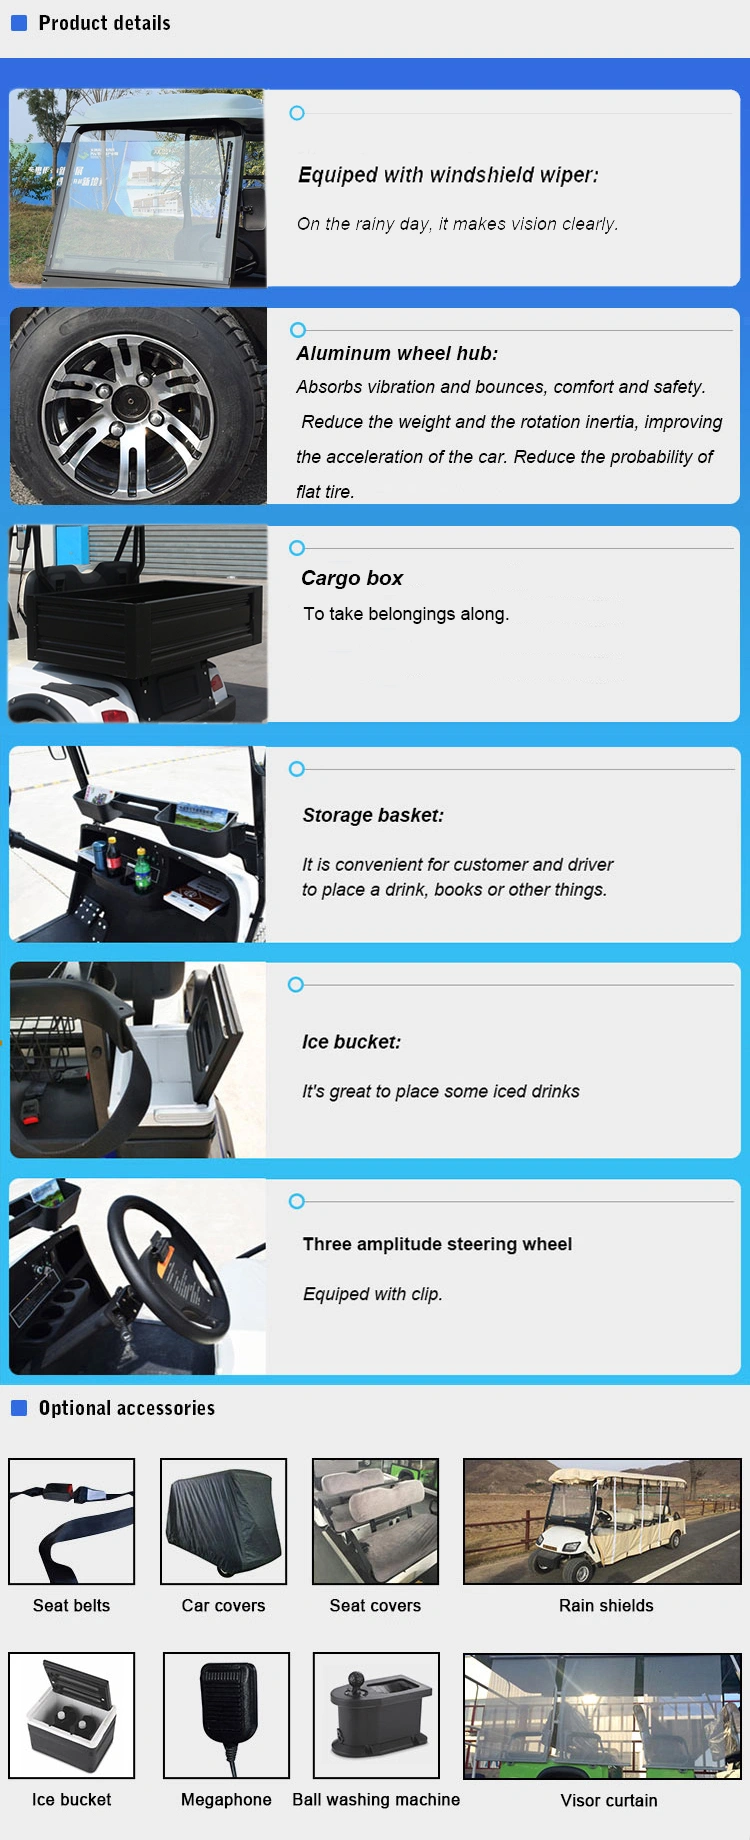 6 Persons Golf Carts Electric Vehicles From Tianjin Zhongyi with Ce